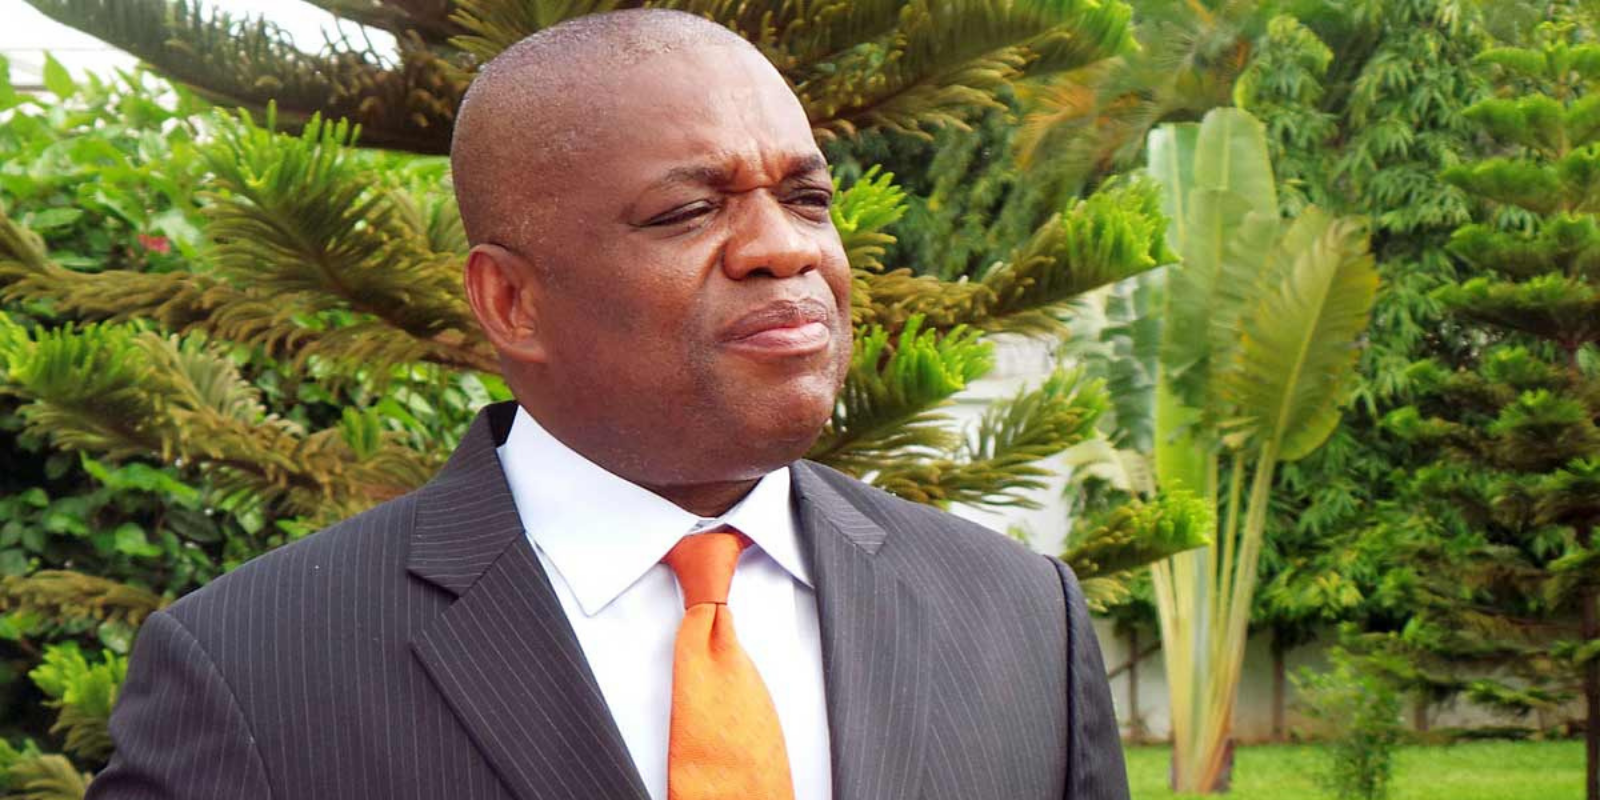 Orji Uzor Kalu is the governor of which state?